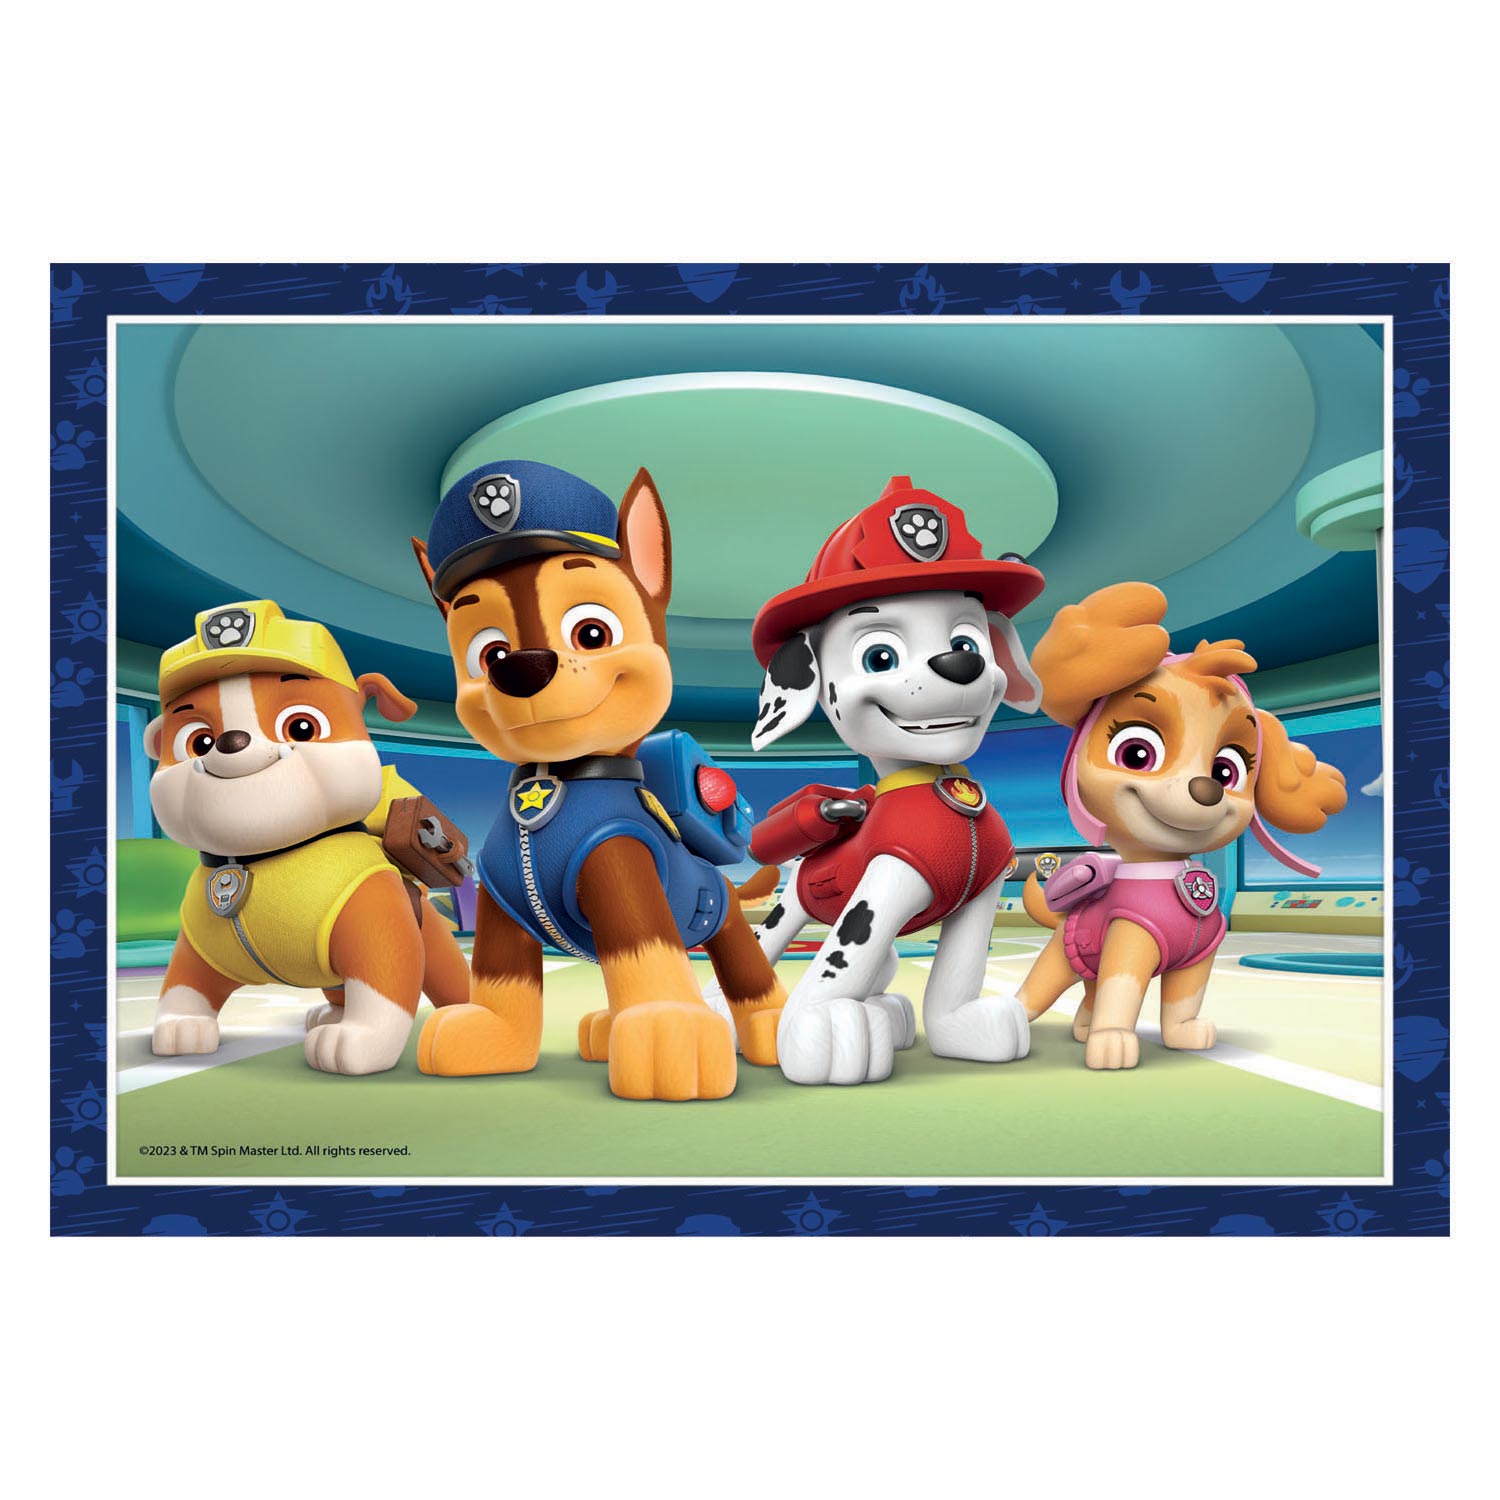 Clementoni Puzzels PAW Patrol, 4in1